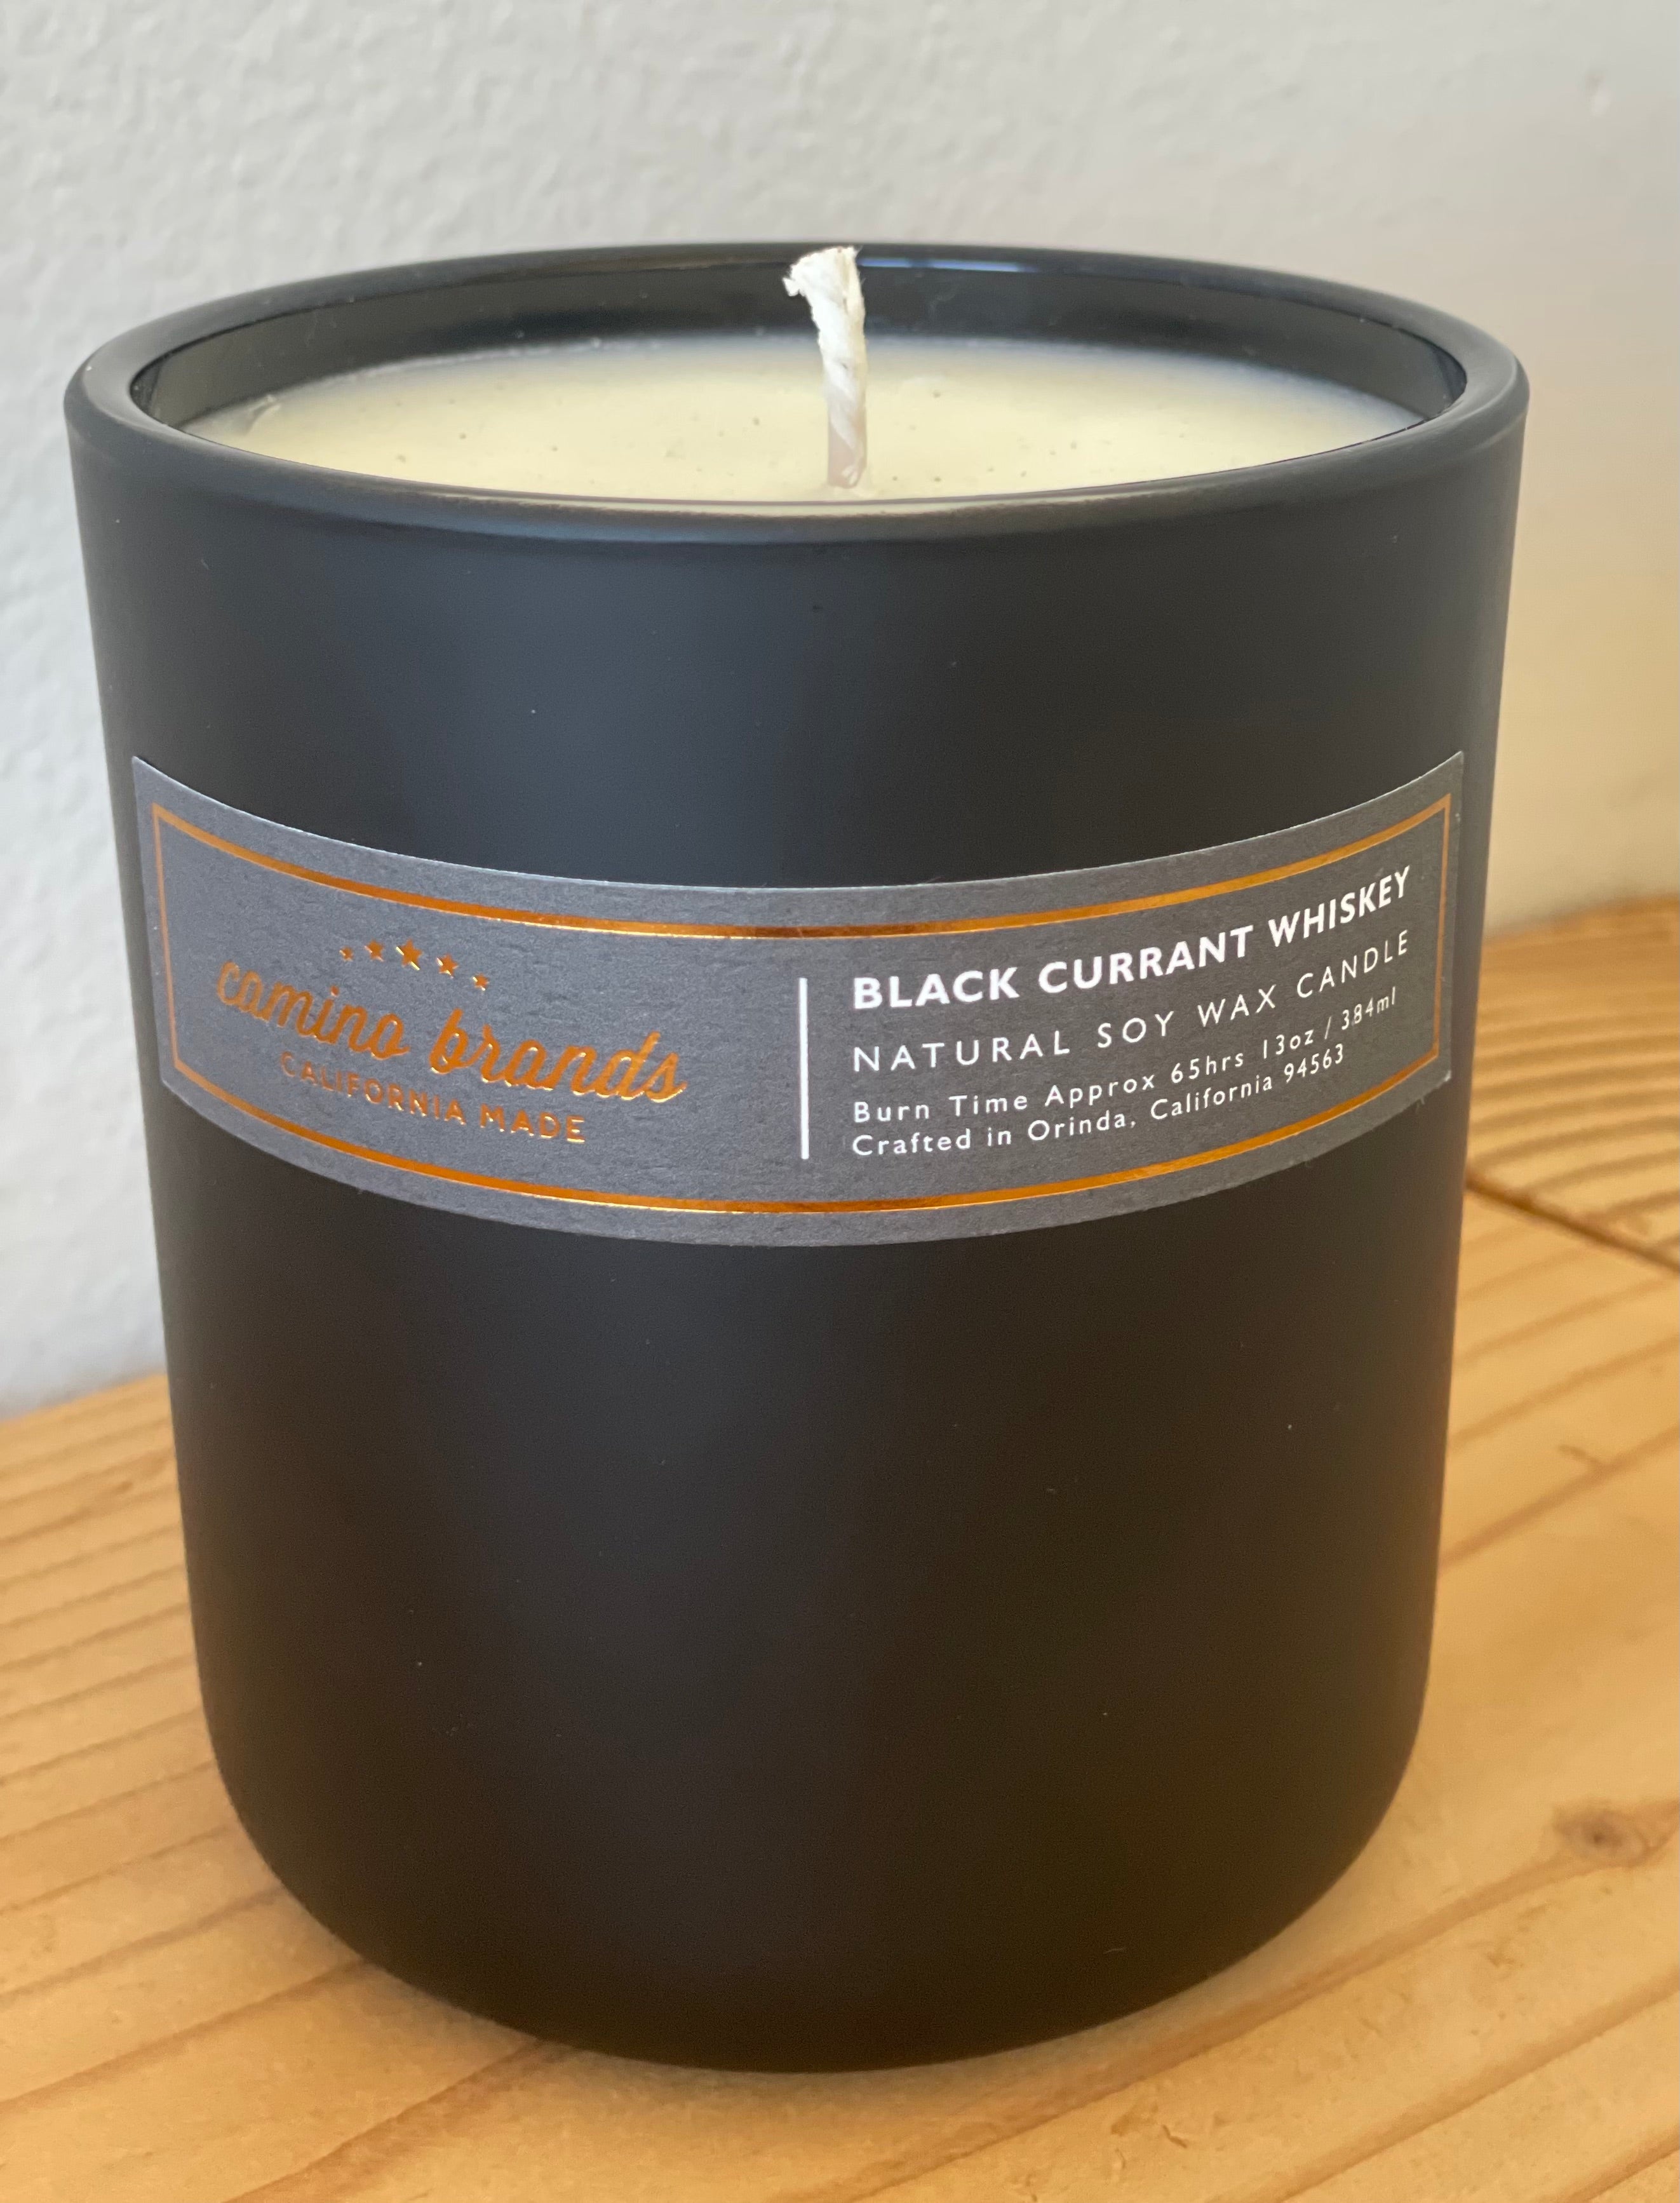 Whiskey Scented Soy Wax Melts – Black Moth Candle Company